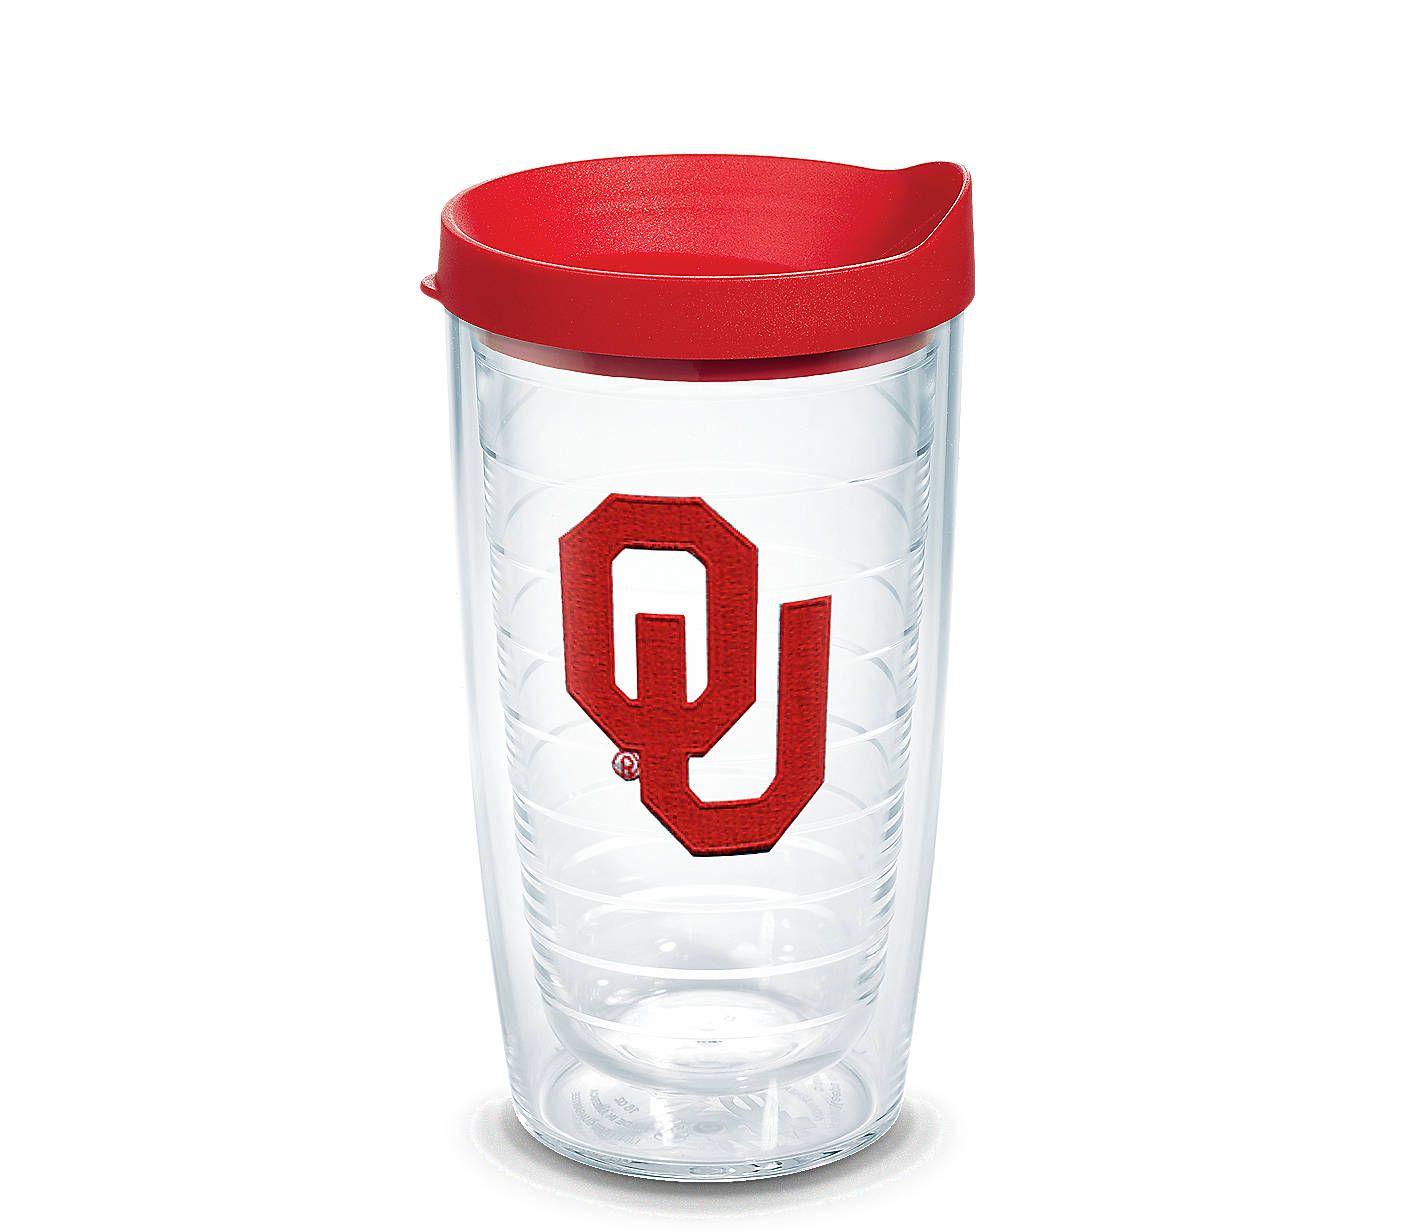 Sooners Logo - Oklahoma Sooners Logo Emblem With Travel Lid. Tervis Official Store